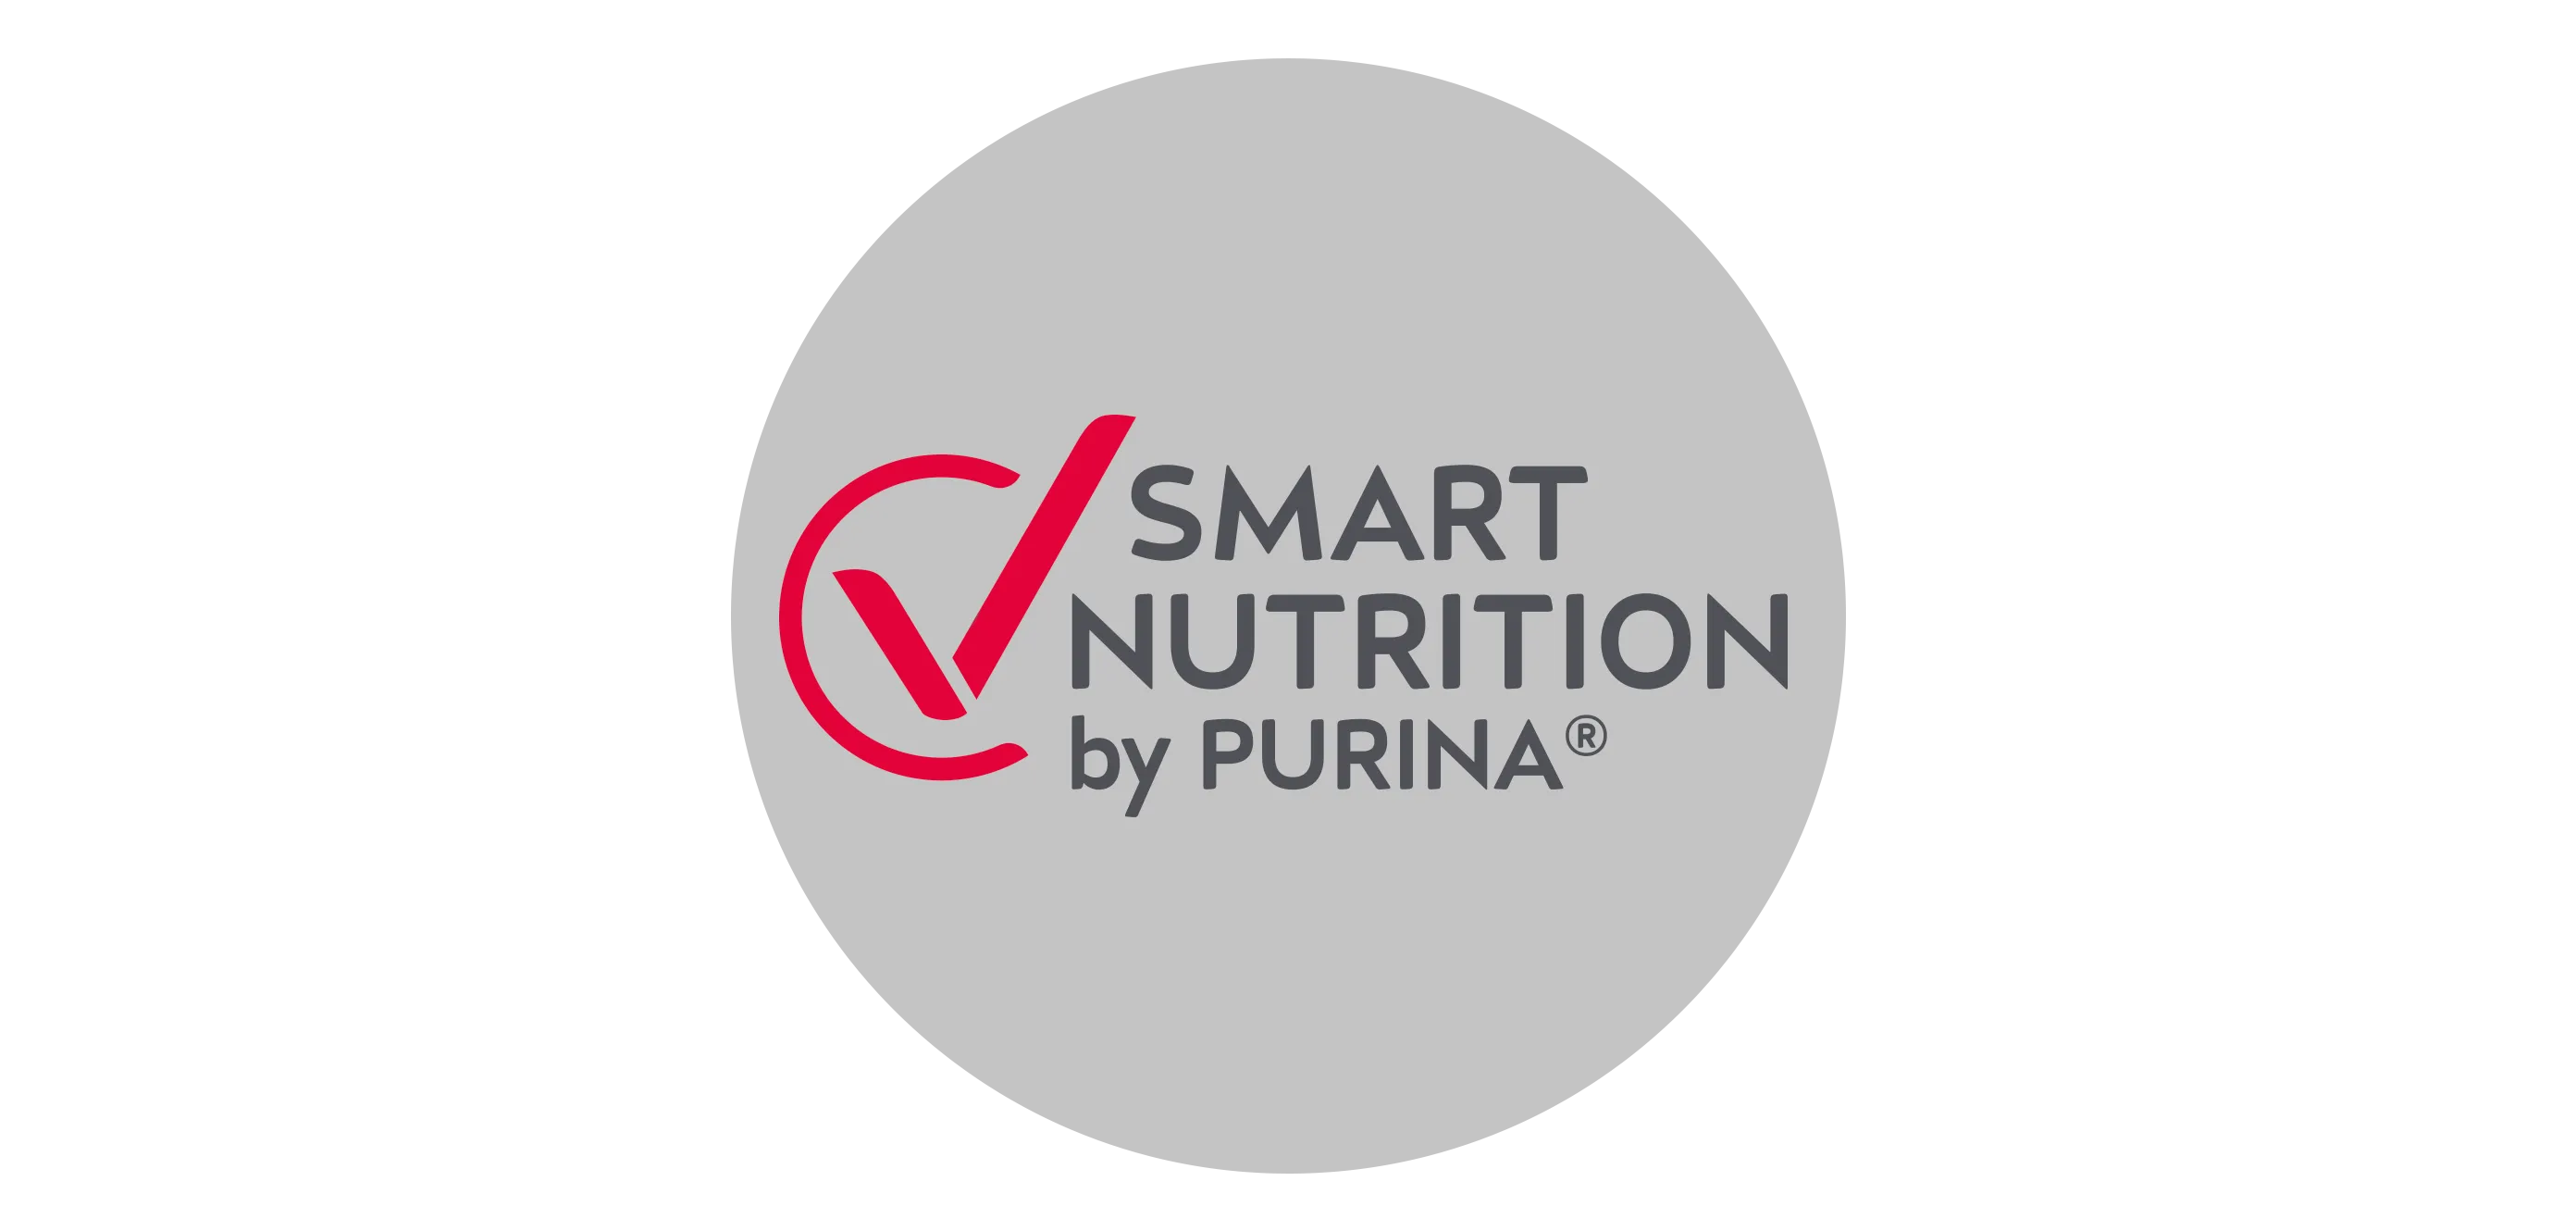 purina_excellent_logo_smart_nutrition.png